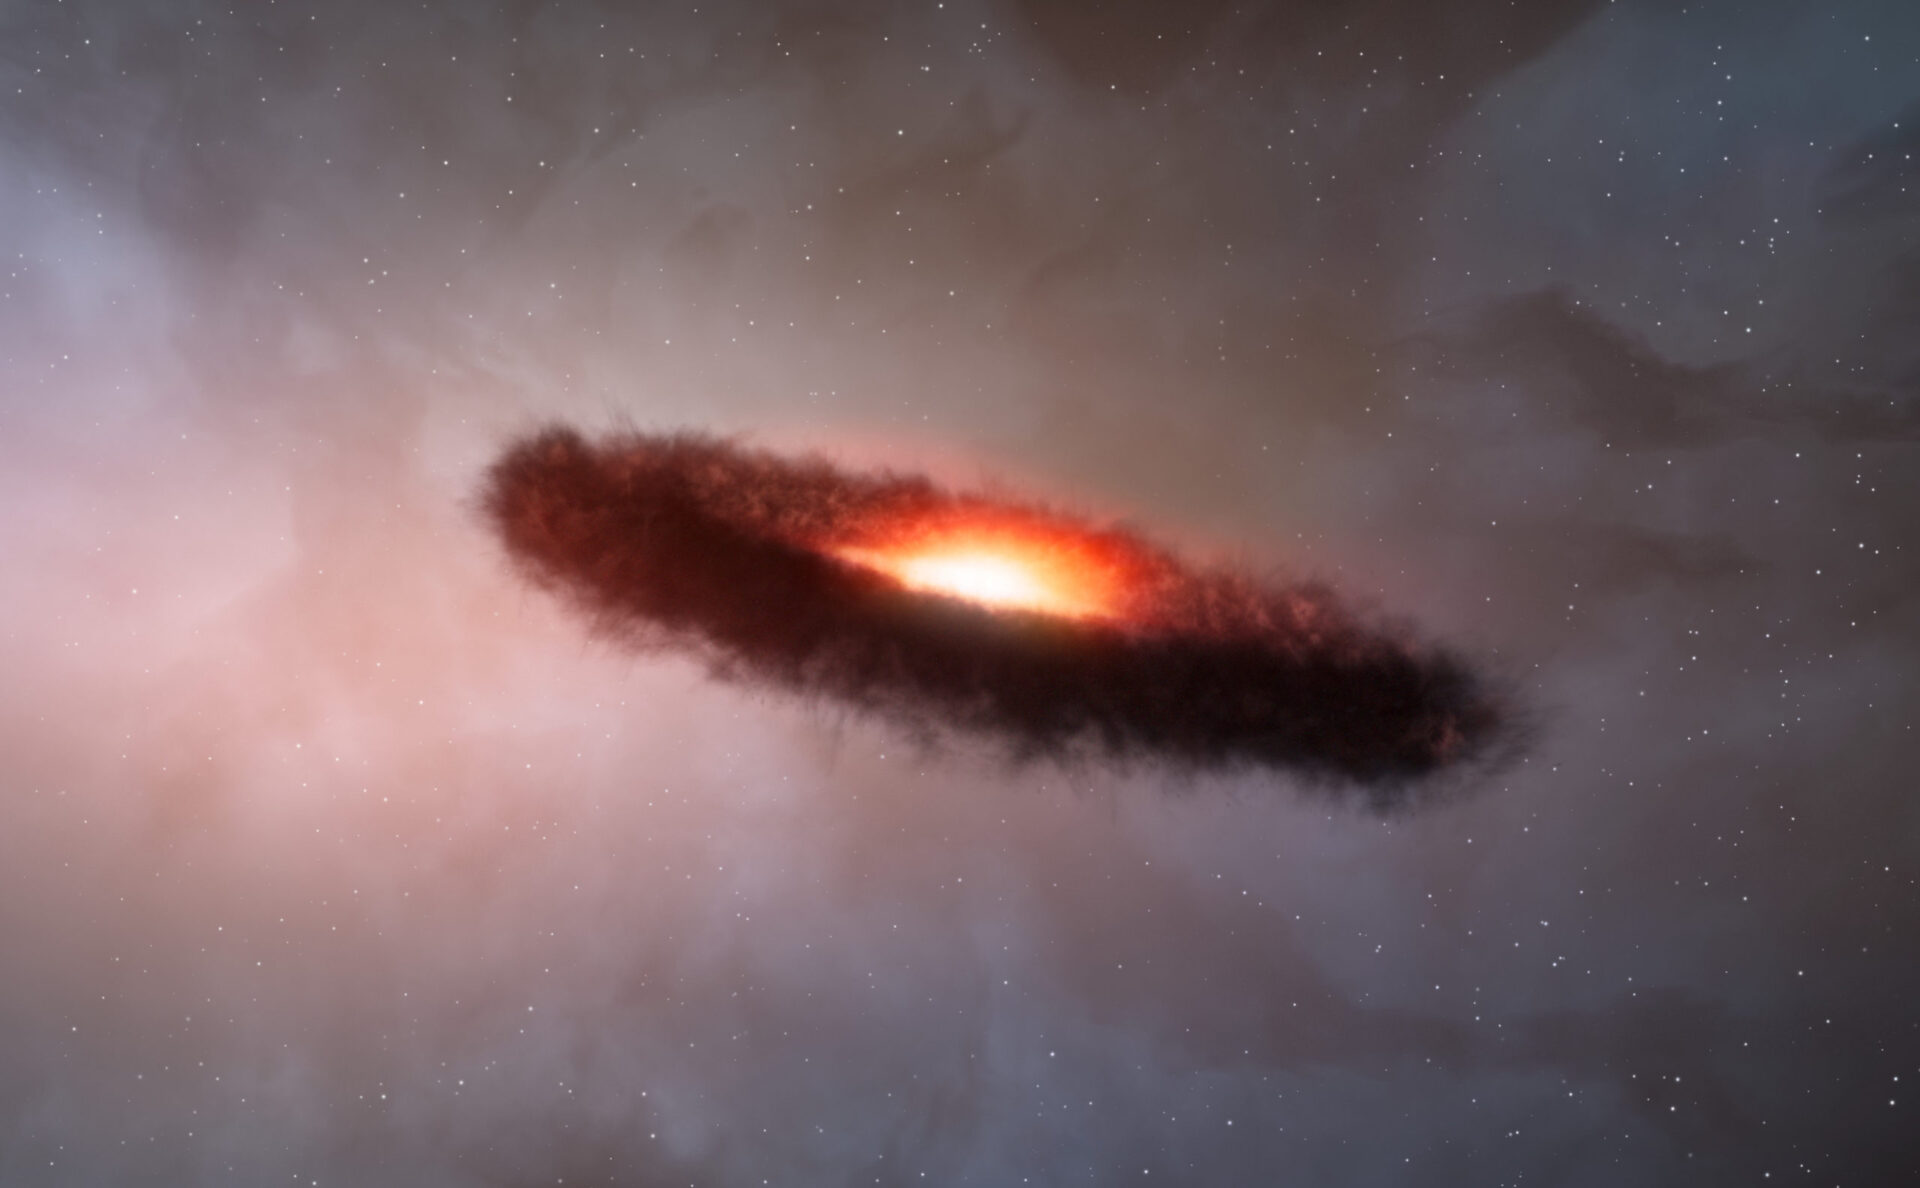 Disc of gas and cosmic dust around a brown dwarf